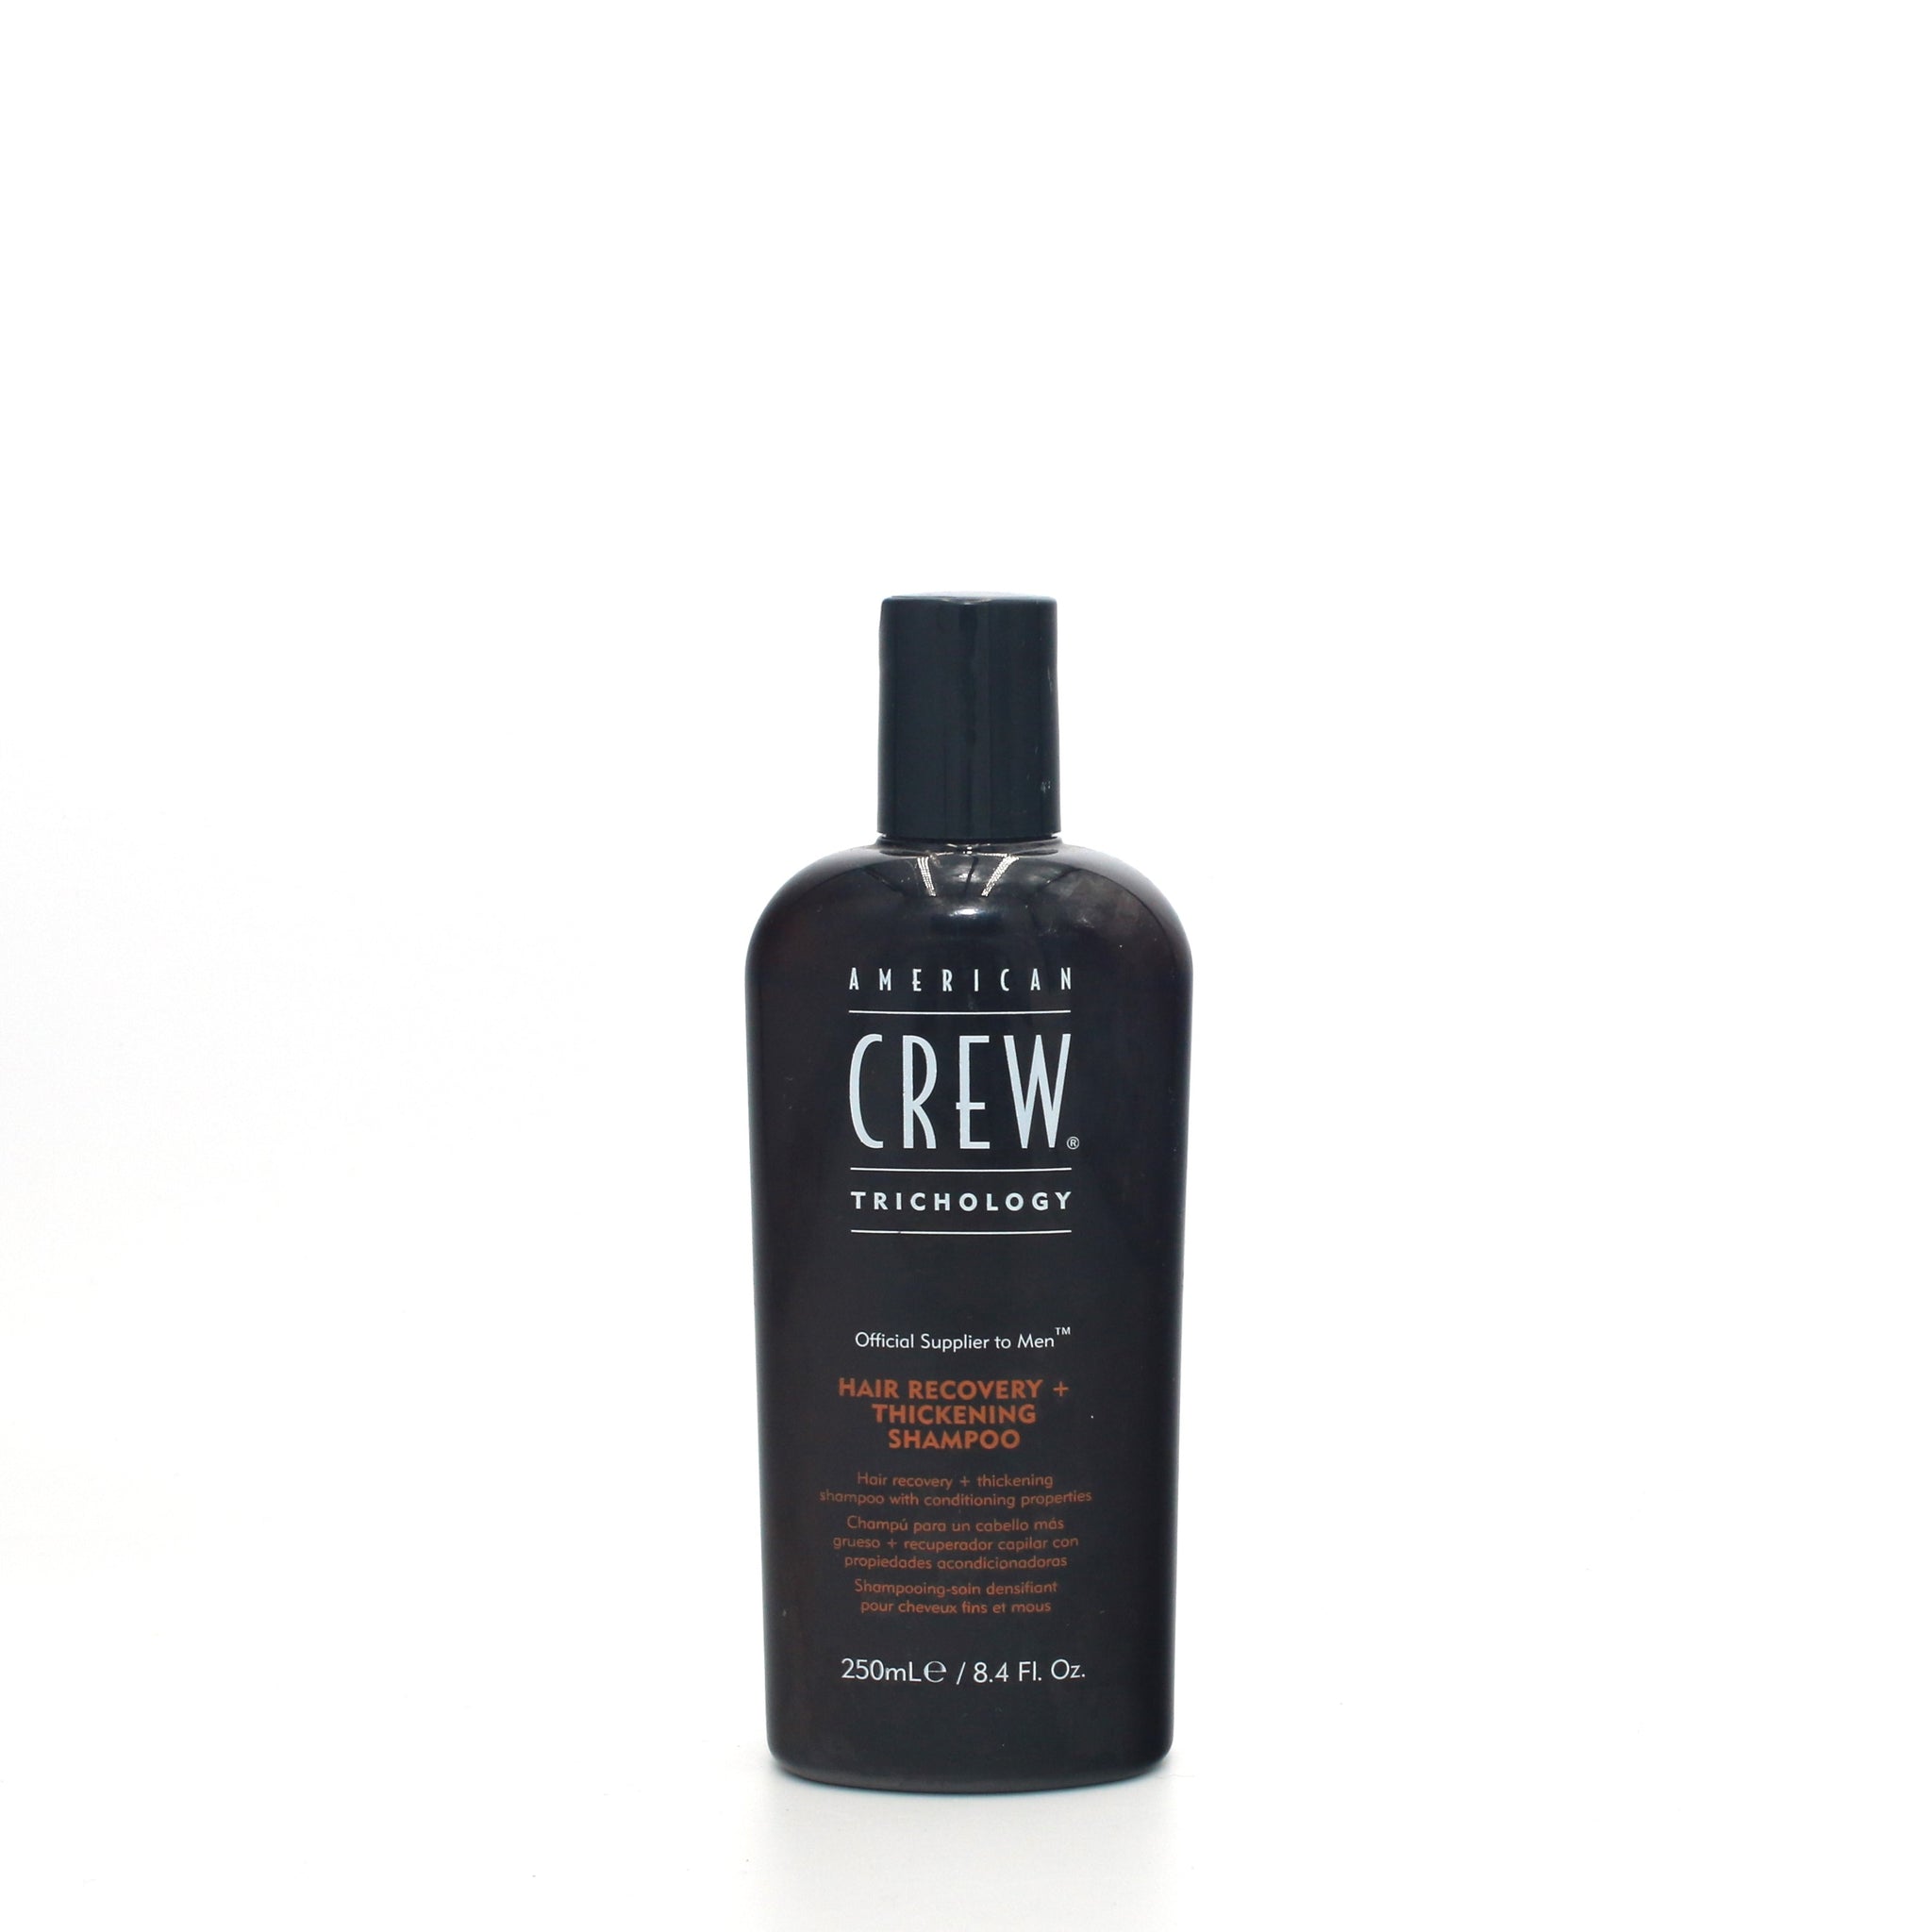 AMERICAN CREW Trichology Hair Recovery + Thickening Shampoo 8.4 oz